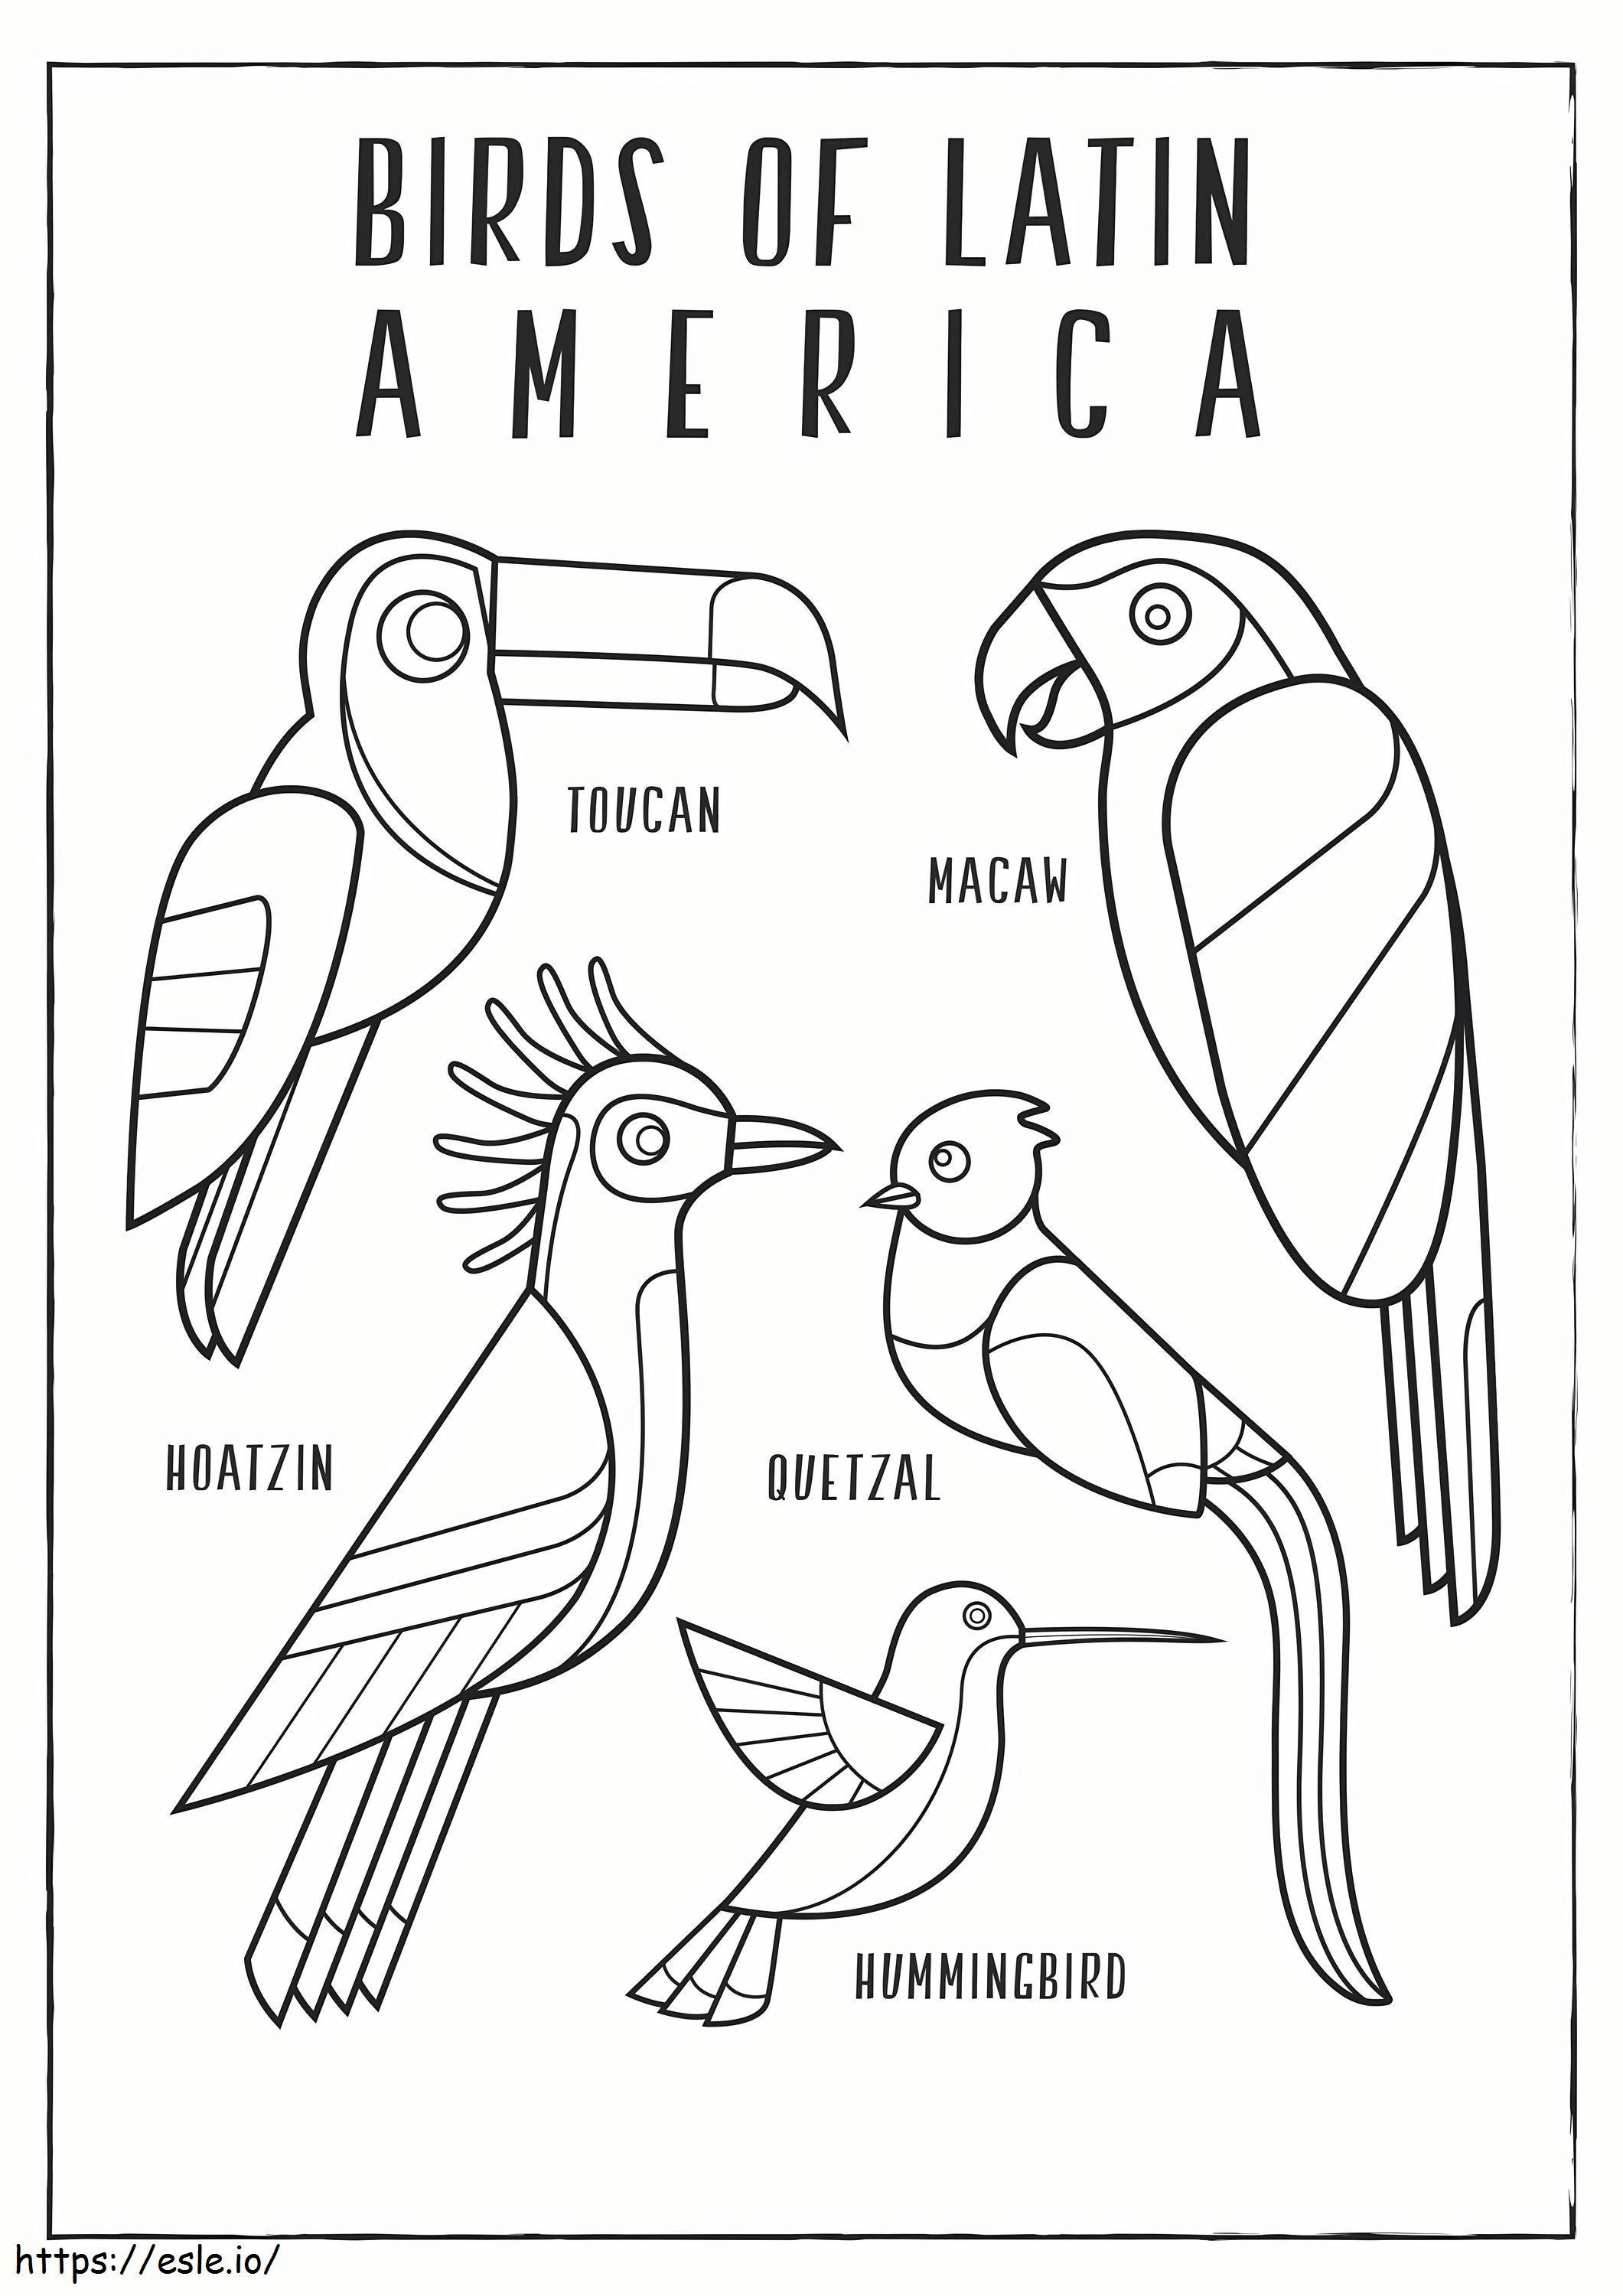 Scaled Birds Of Latin America coloring page